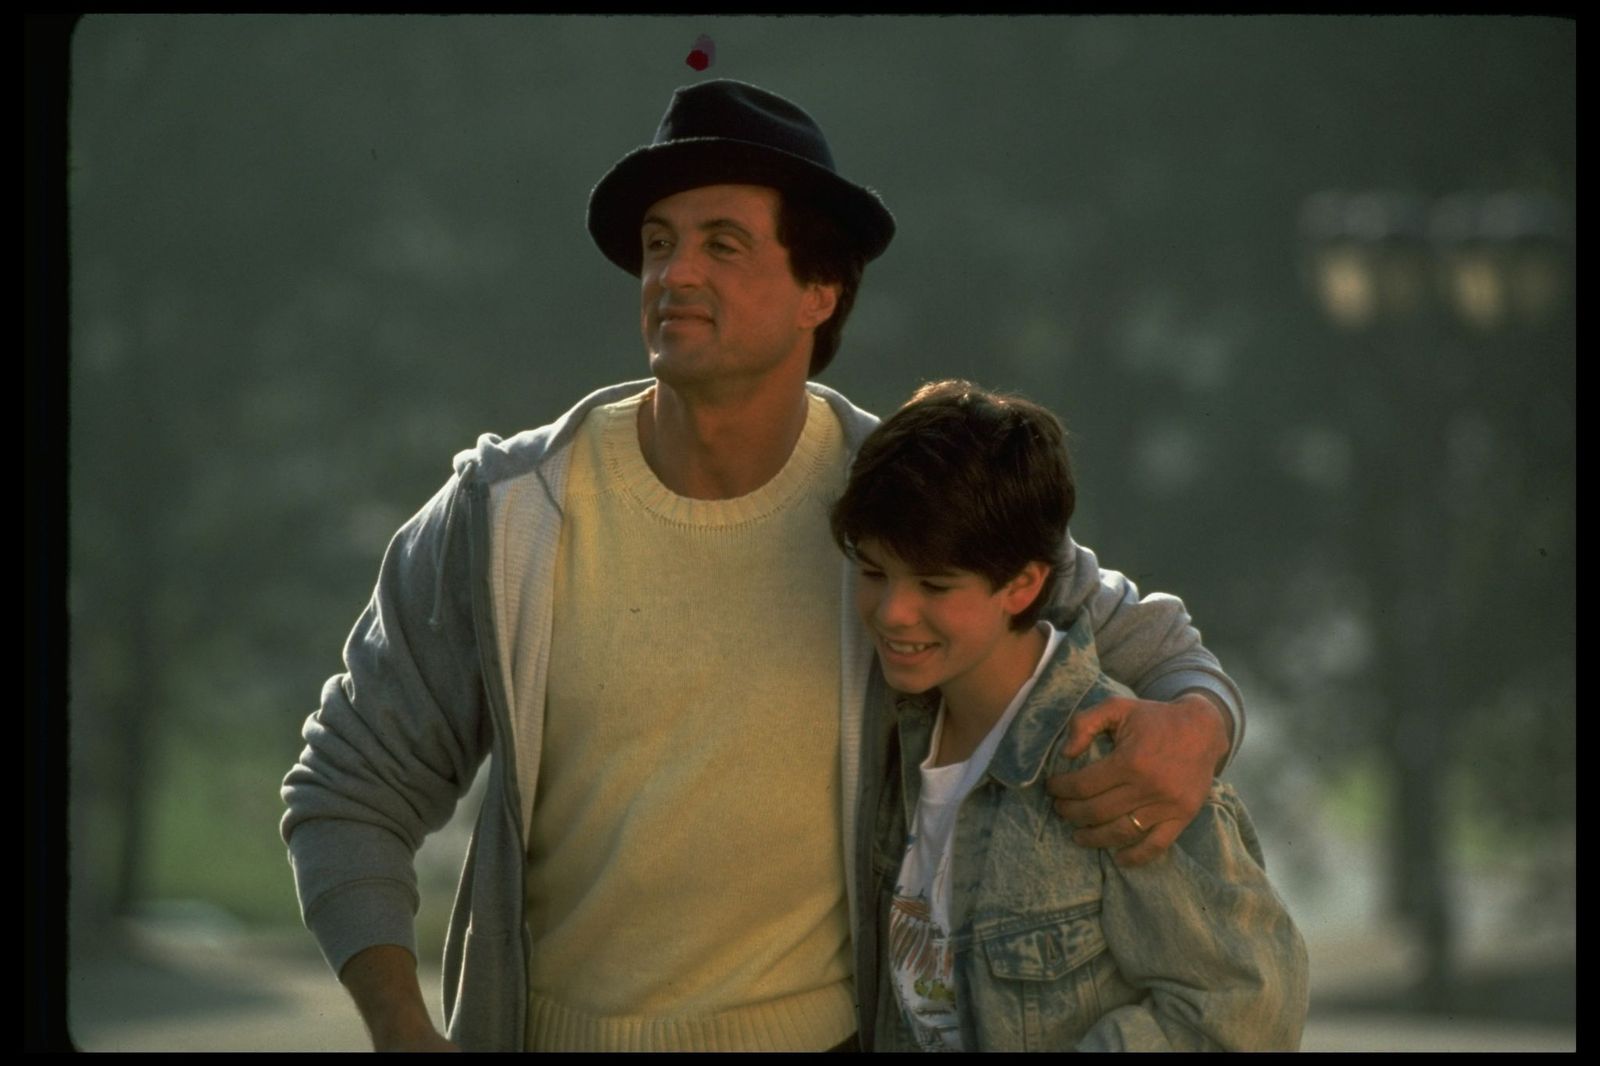 Actor Sylvester Stallone with his arm around his son, Sage Stallone, in scene from motion picture Rocky V.. | Source: Getty Images